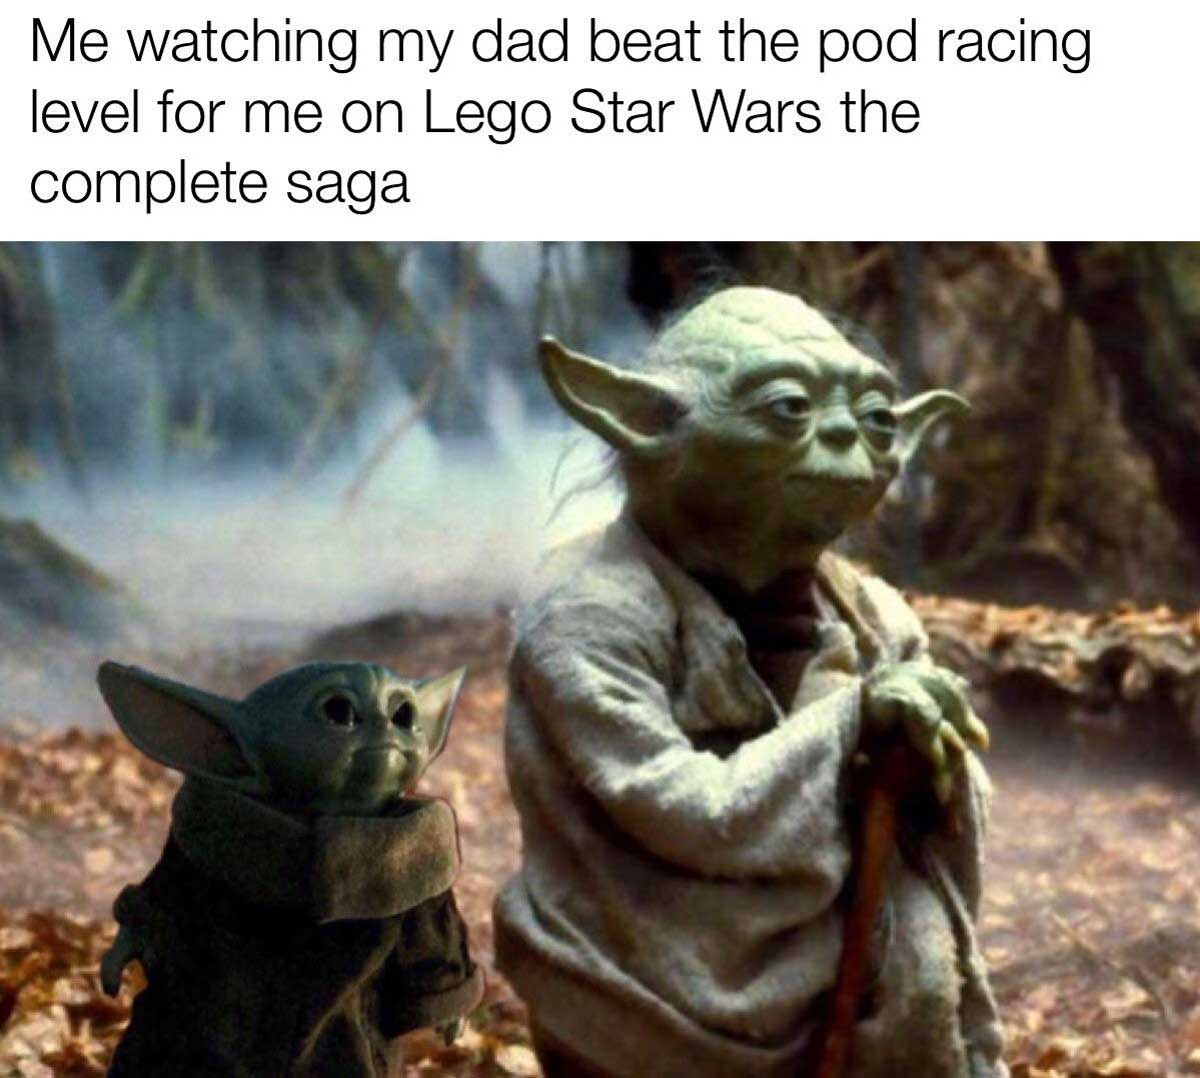 star wars yoda - Me watching my dad beat the pod racing level for me on Lego Star Wars the complete saga